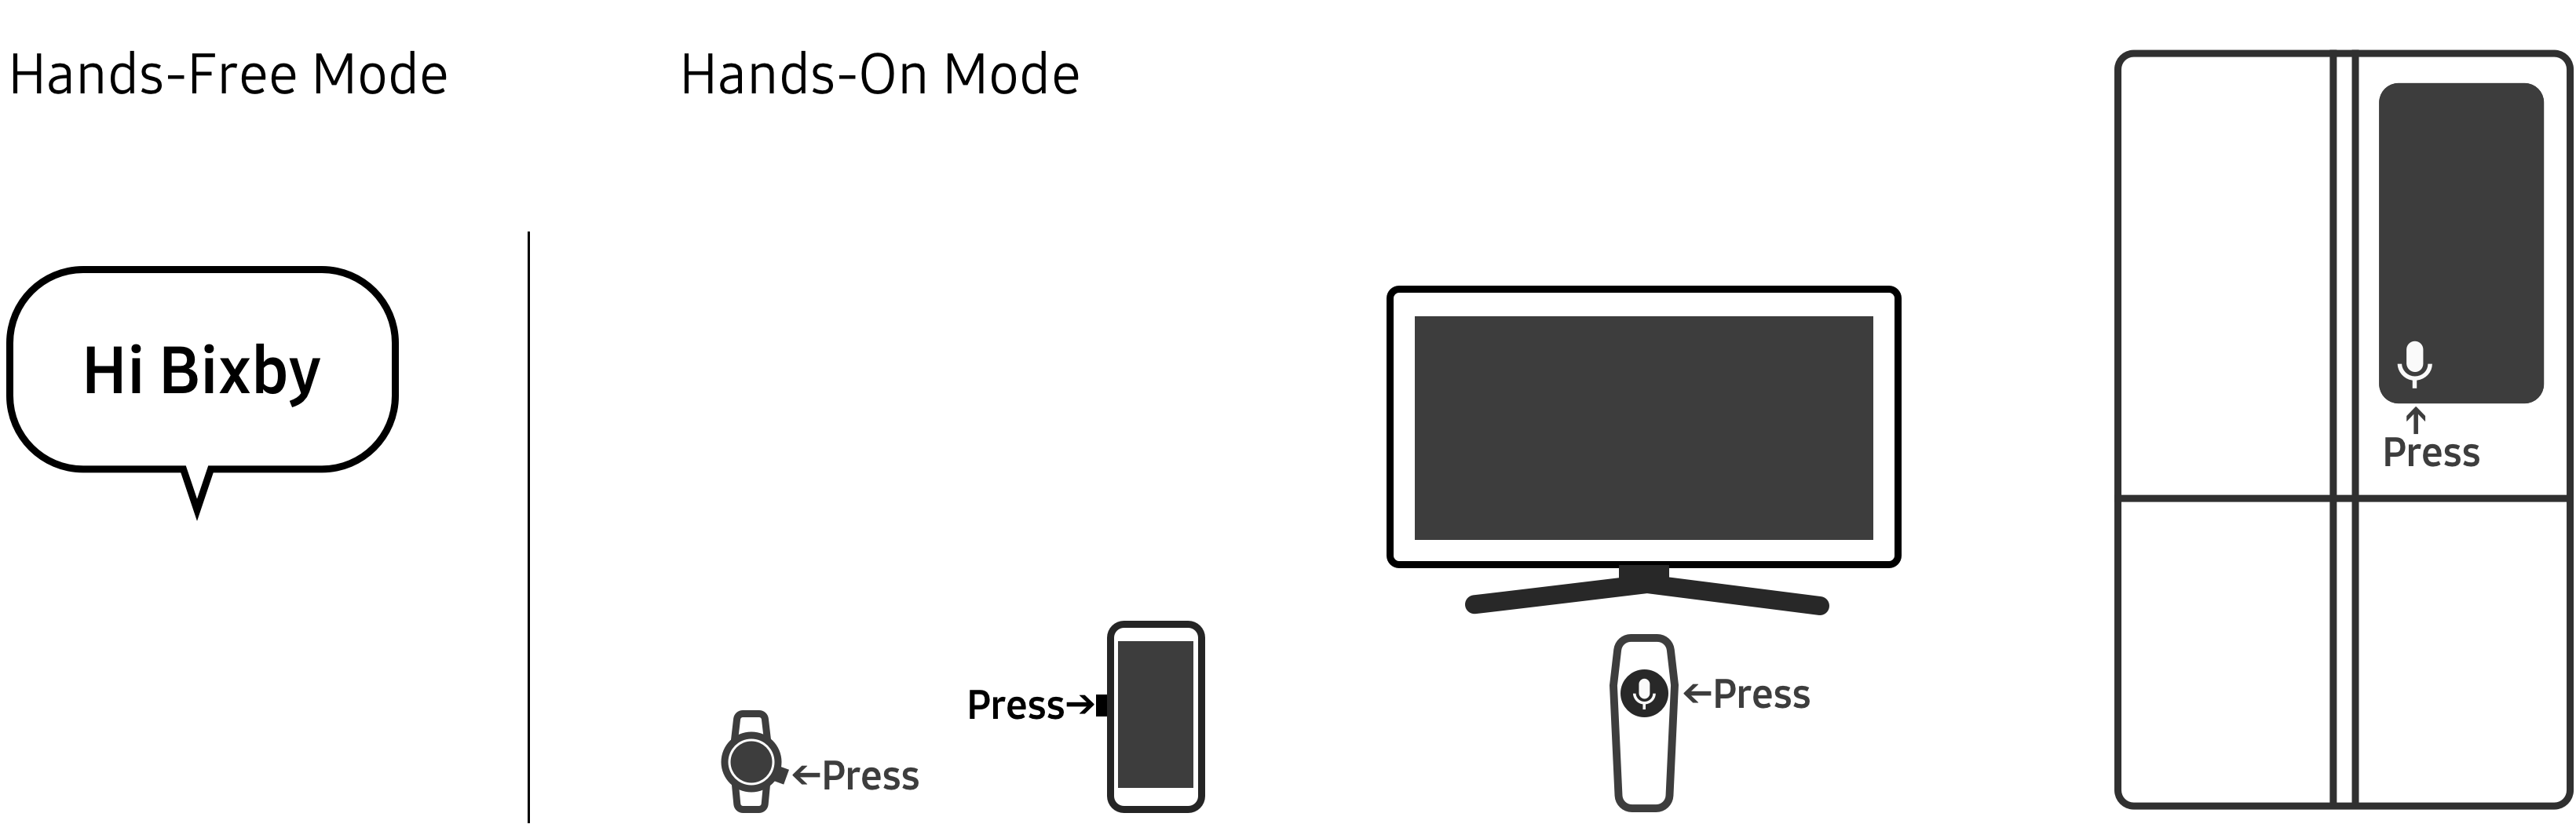 Diagram showing two ways to invoke Bixby: Hands-Free Mode and Hands-On Mode